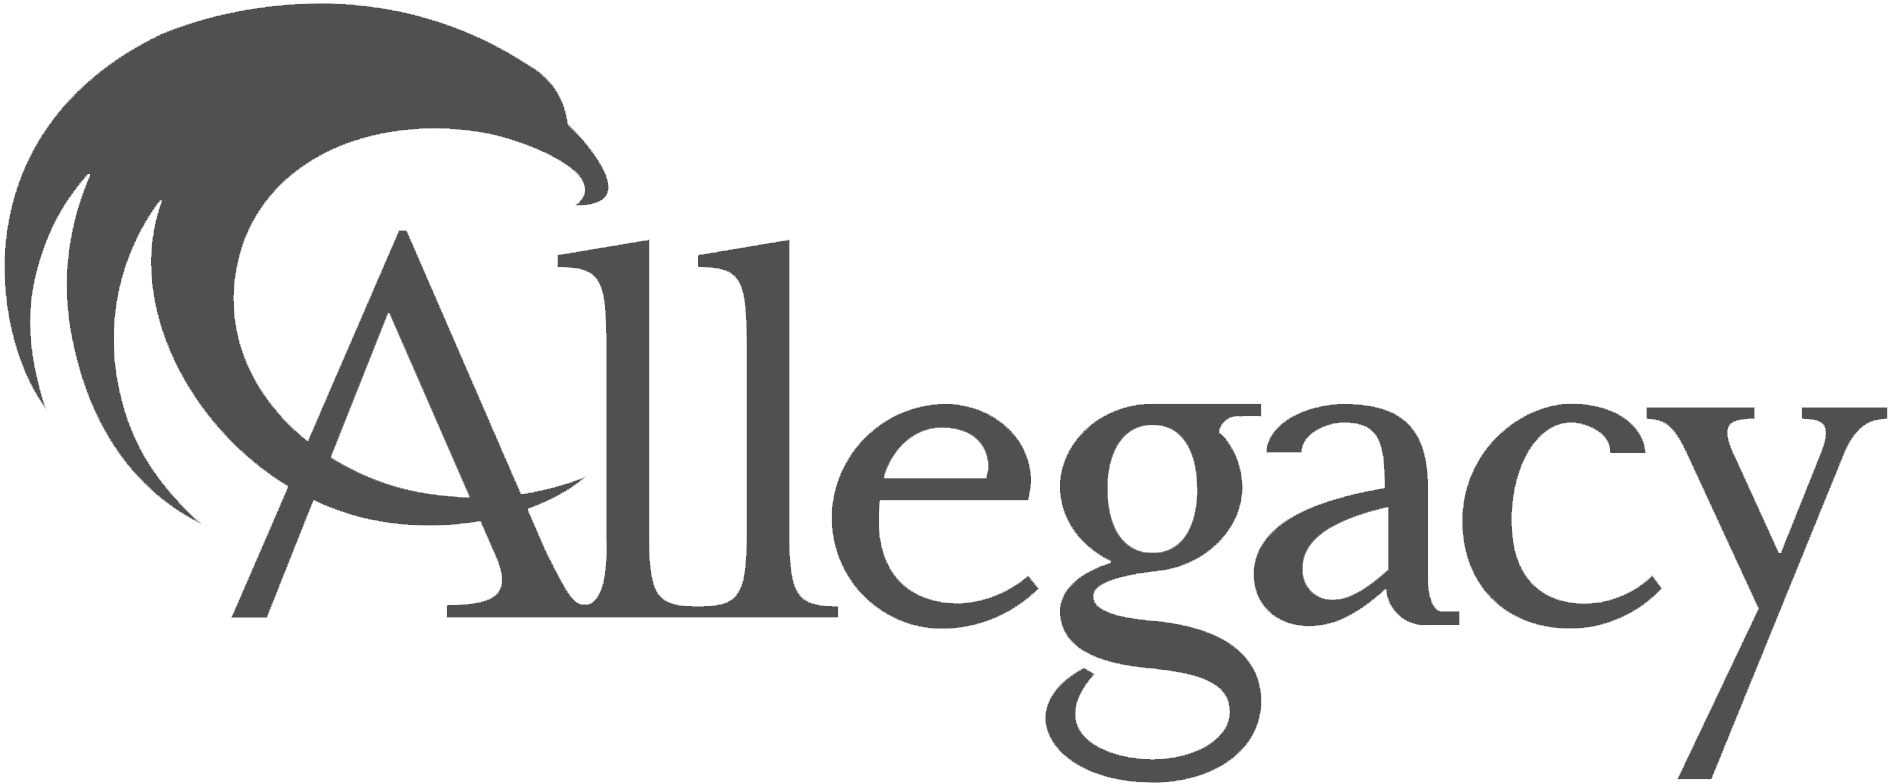 allegacy